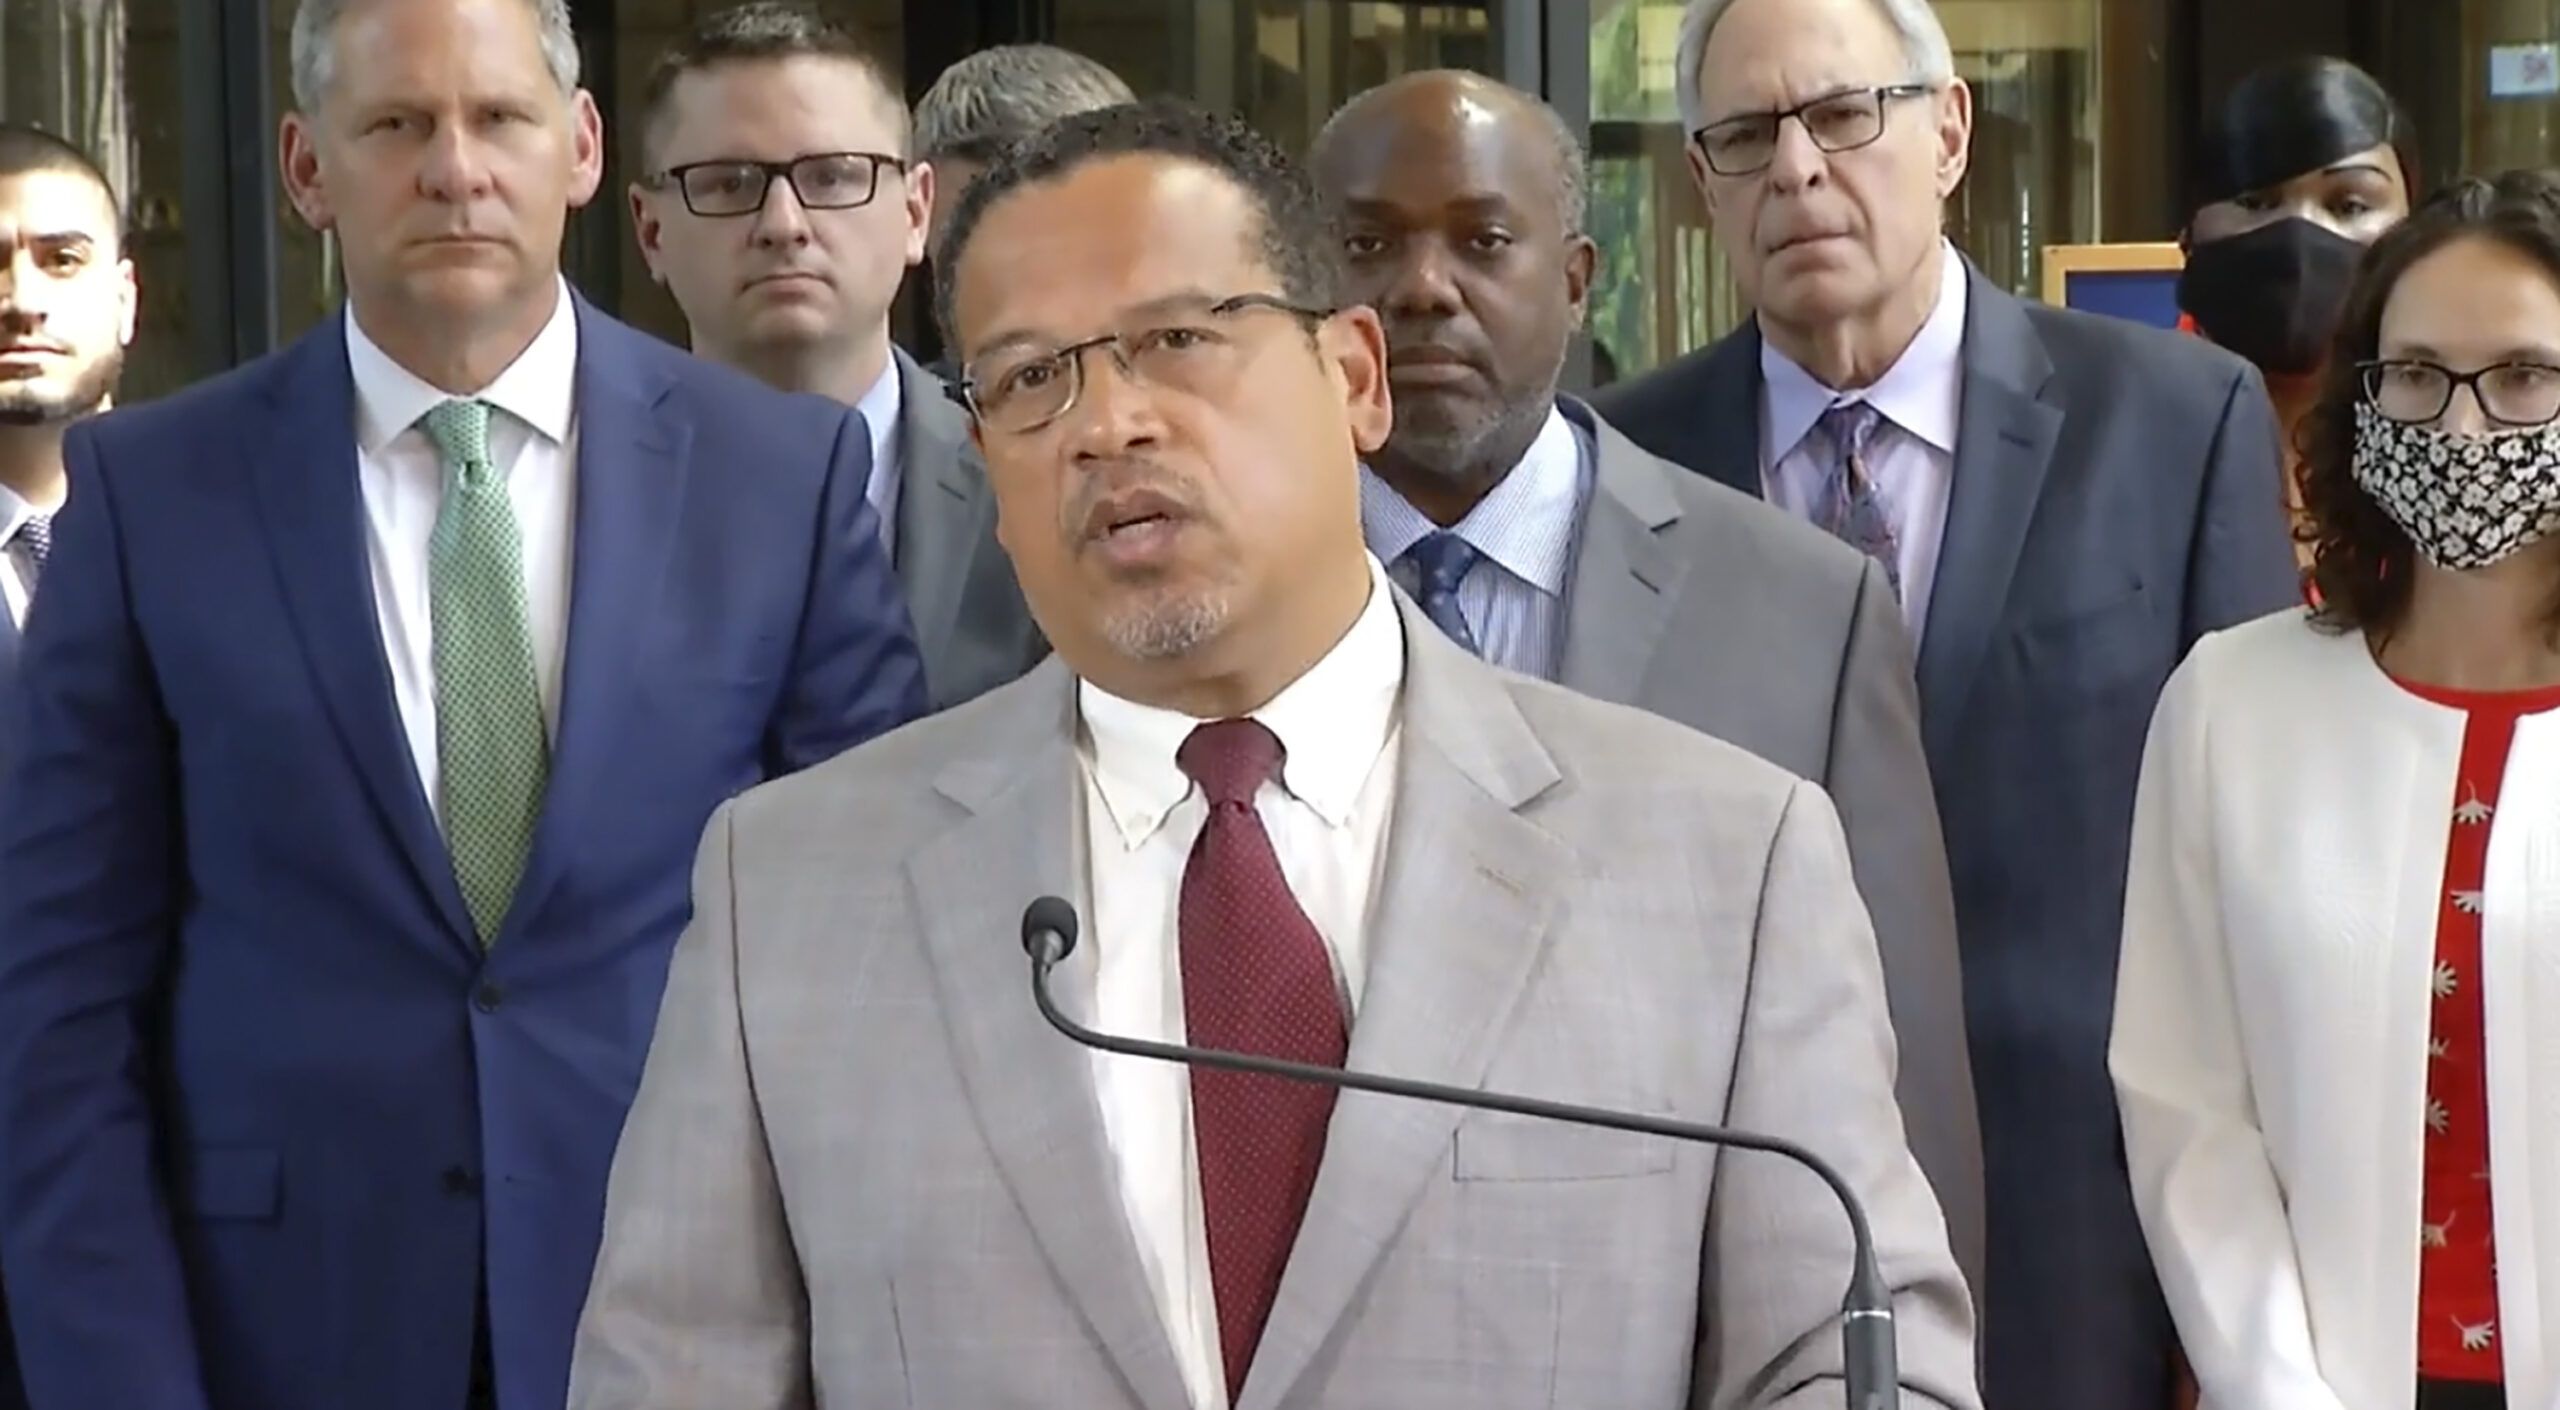 FILE - In this image taken from video, Minnesota Attorney General Keith Ellison speaks to the media Friday, June 25, 2021, at the Hennepin County Courthouse in Minneapolis. Democratic Minnesota Attorney General Keith Ellison, who led the prosecution team that won the conviction of ex-officer Derek Chauvin in the death of George Floyd, announced Monday, Nov. 15, 2021, he will seek a second term. (Court TV via AP, Pool File)